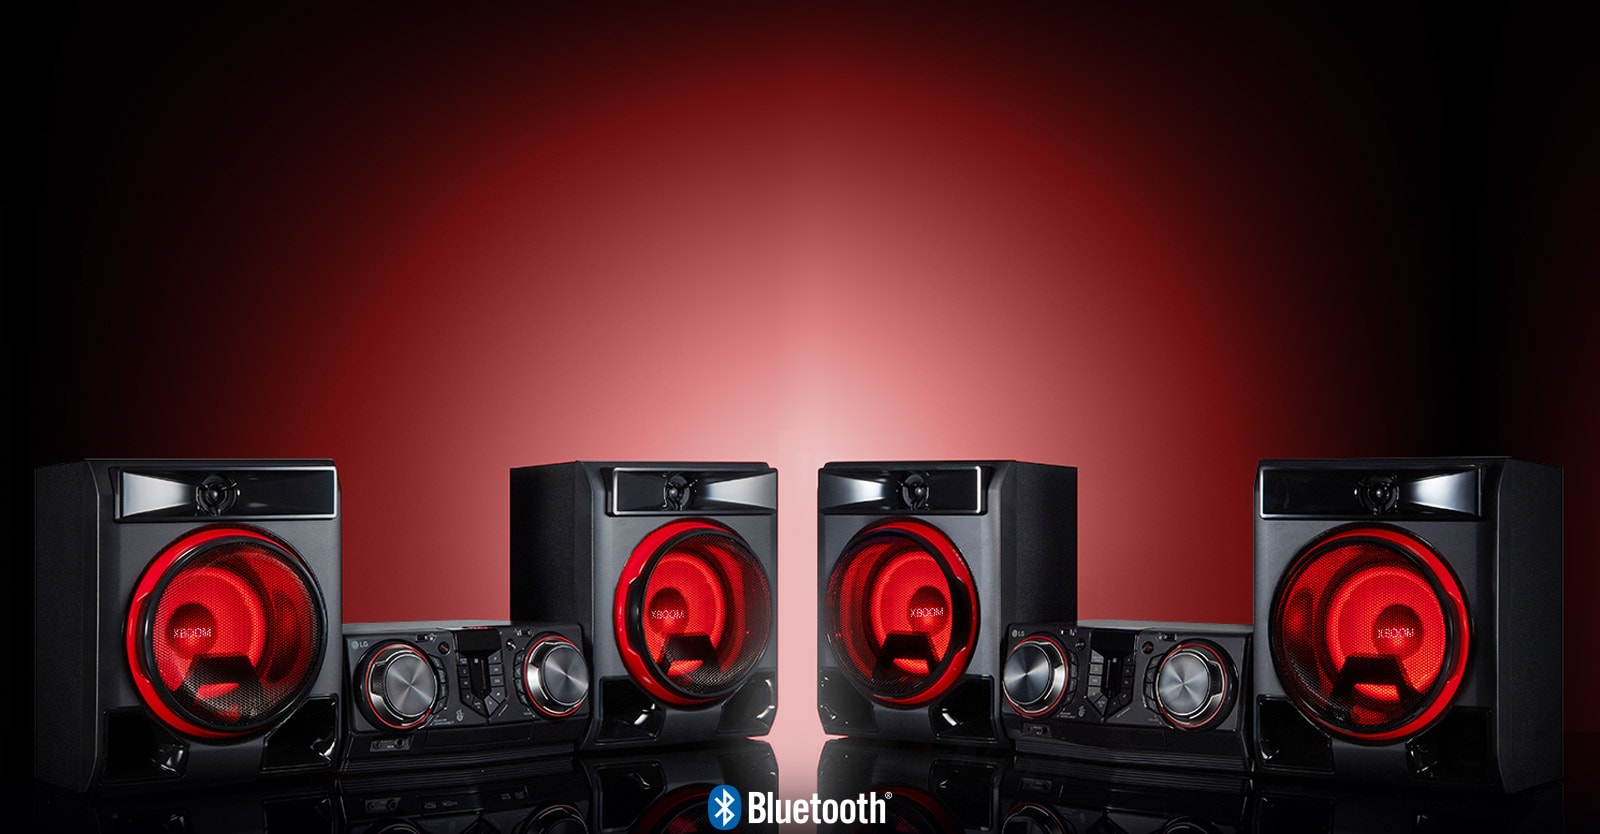 Double Your Sound with Wireless Party Link<br>1